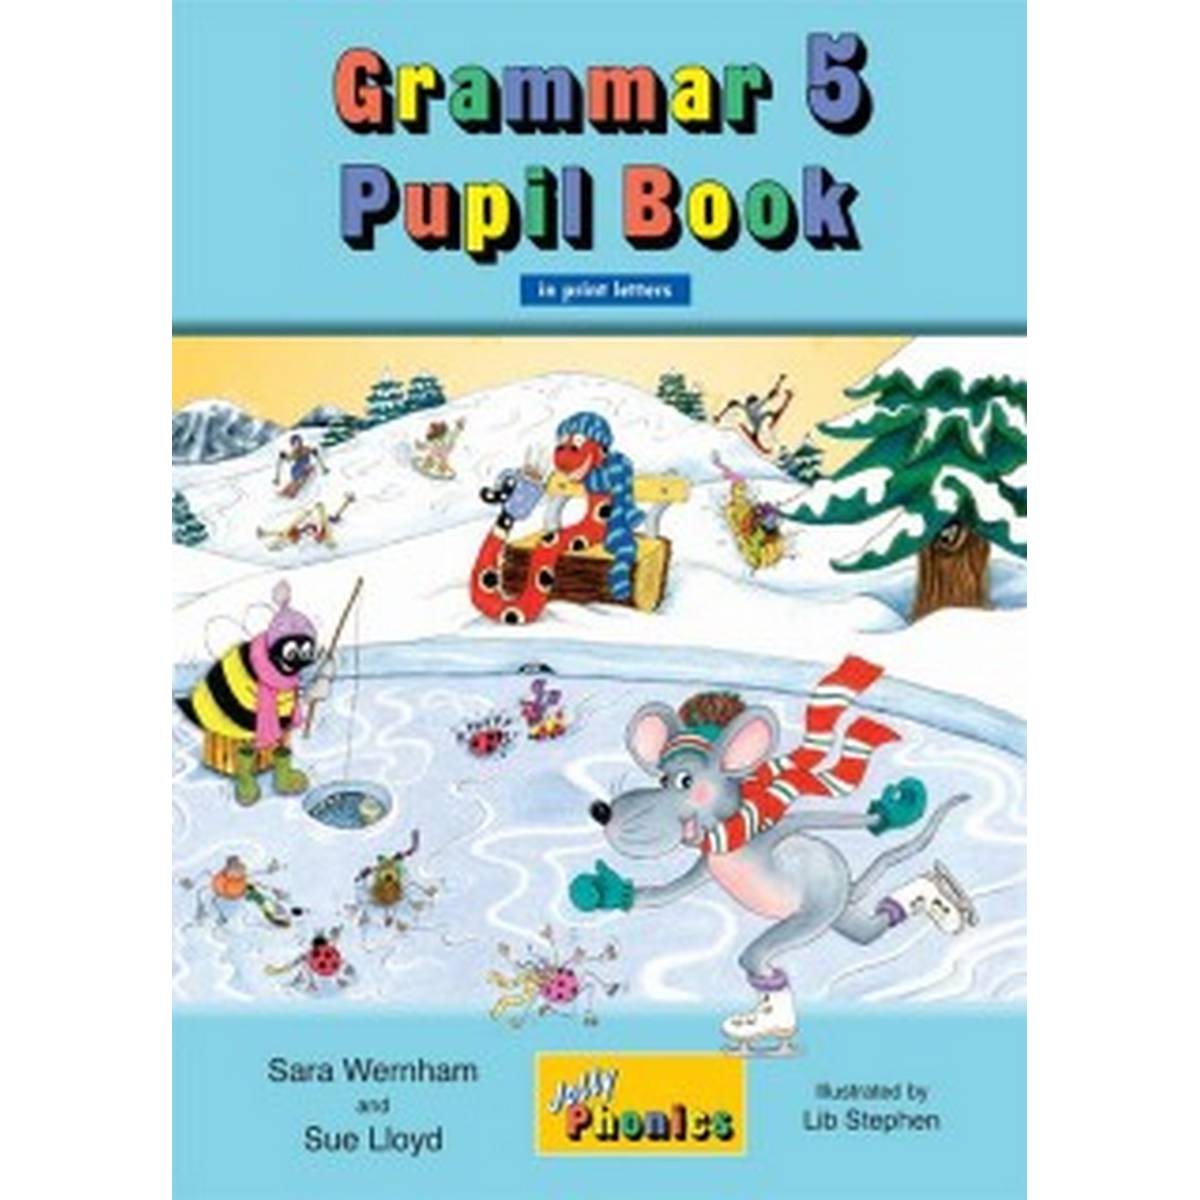 Jolly Grammar 5 Pupil Book (In Print Letters)